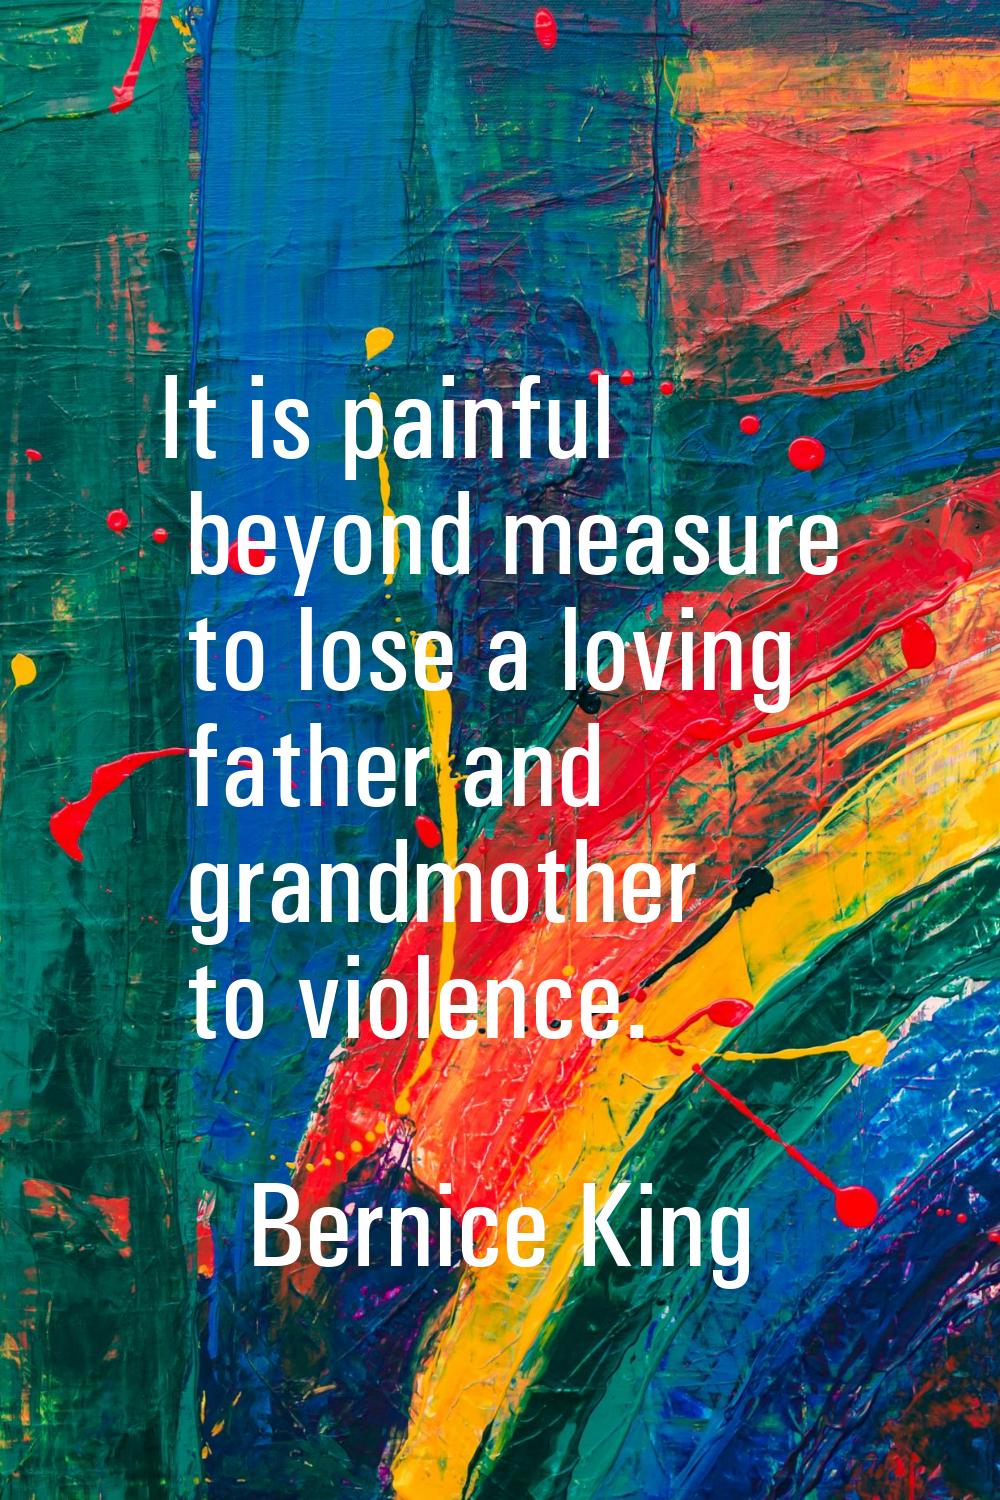 It is painful beyond measure to lose a loving father and grandmother to violence.